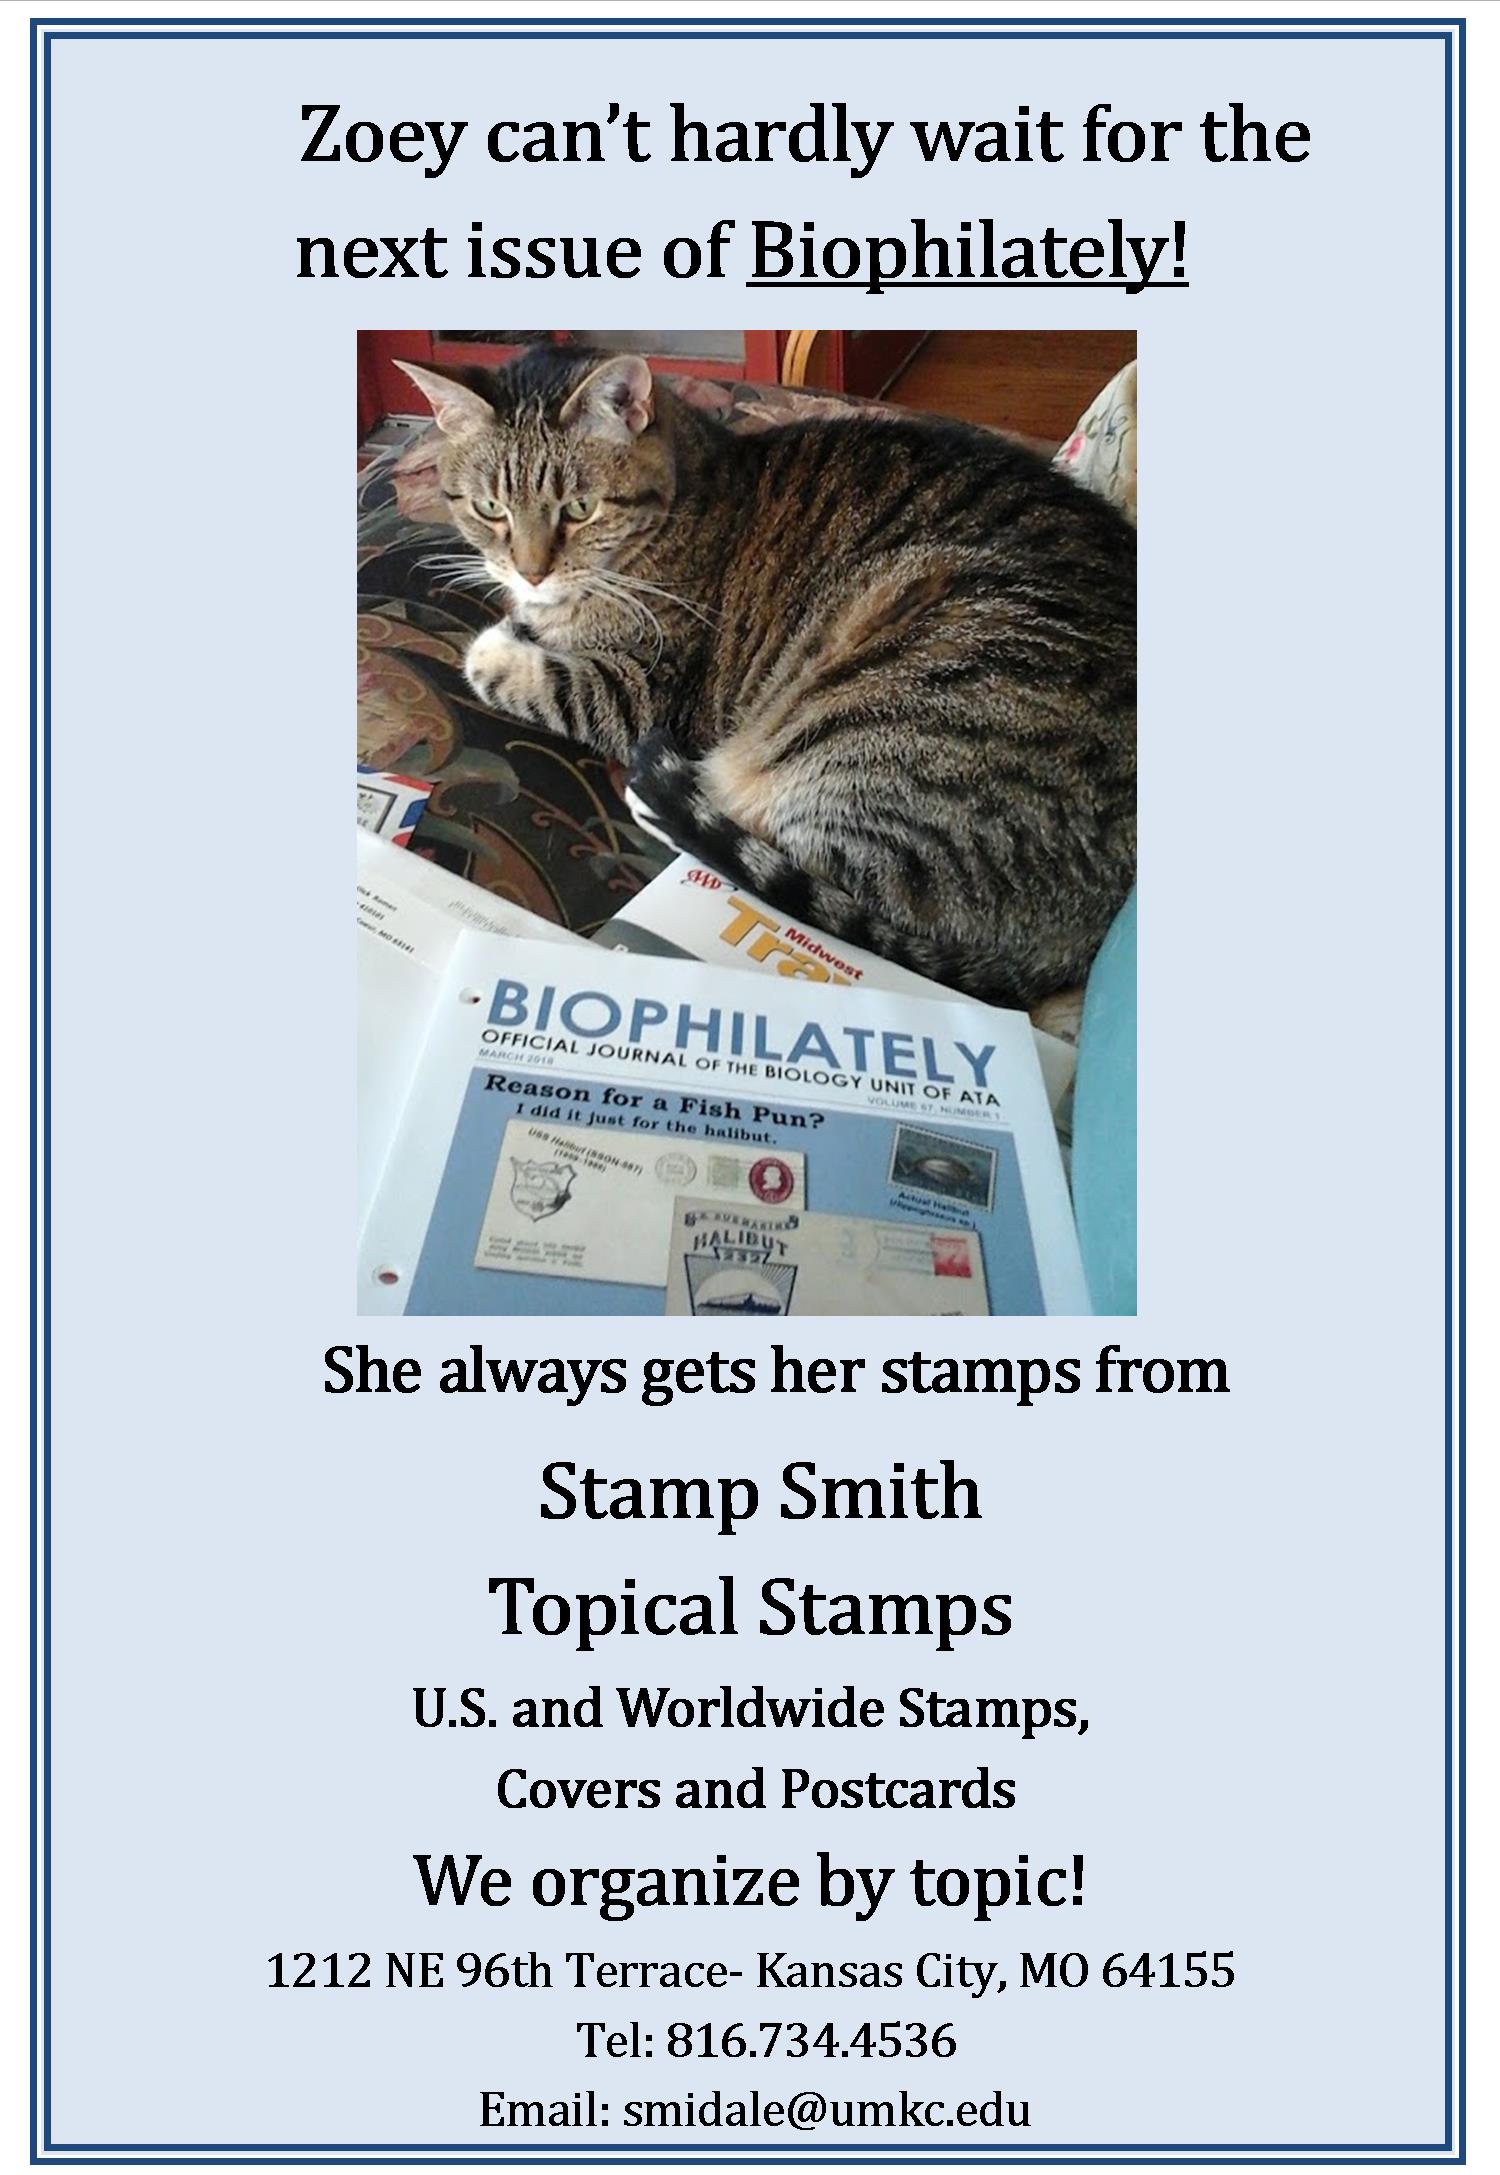 StampSmith ad